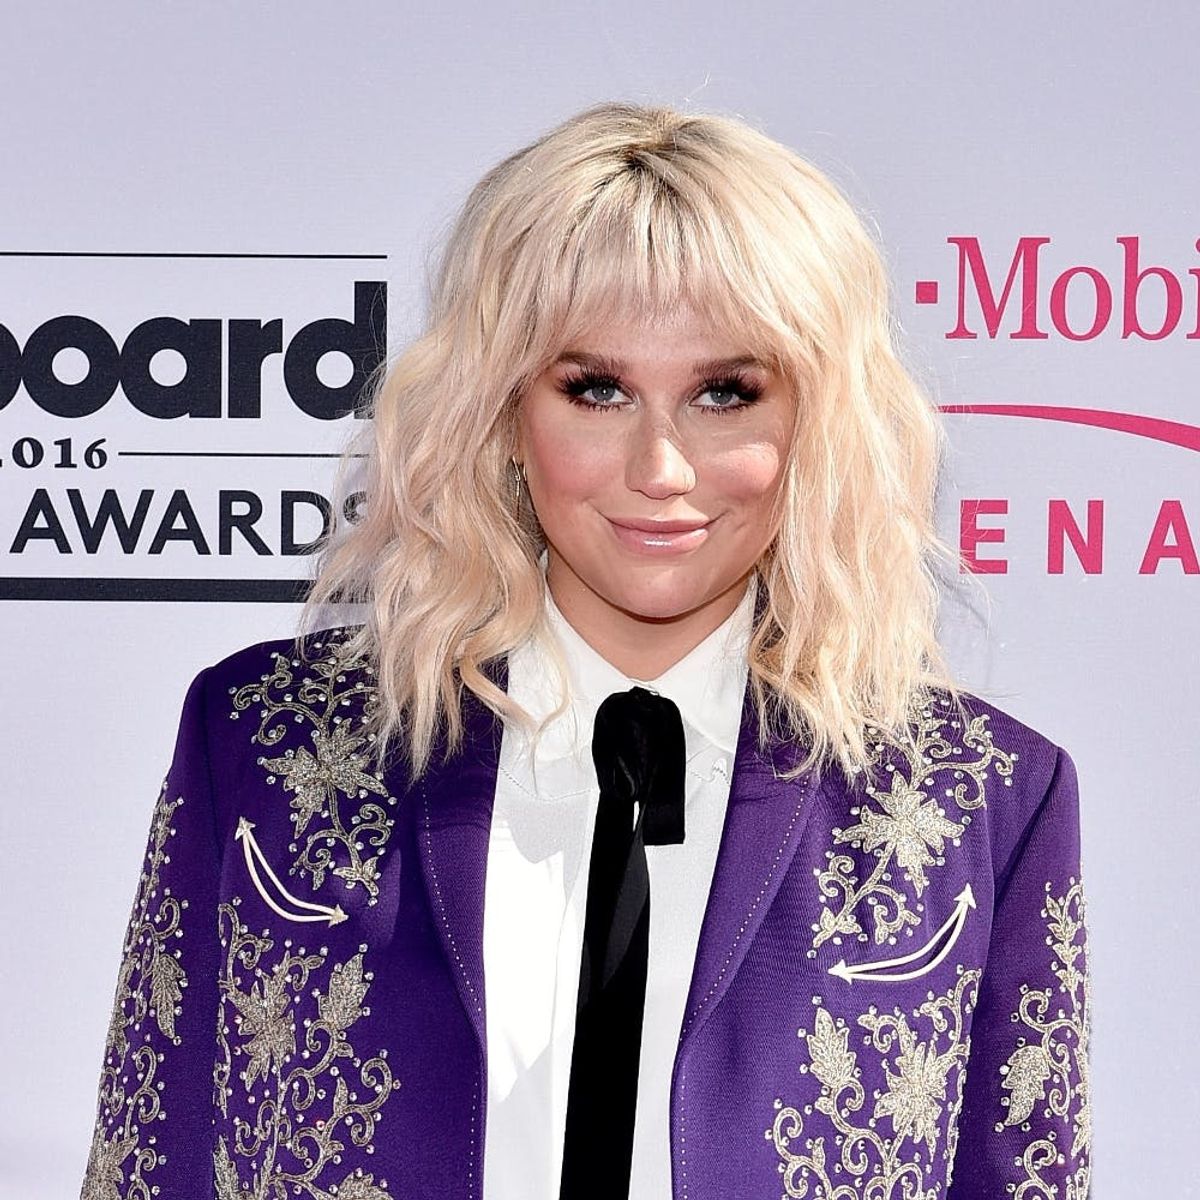 Check Out Kesha’s Luscious New Hairstyle